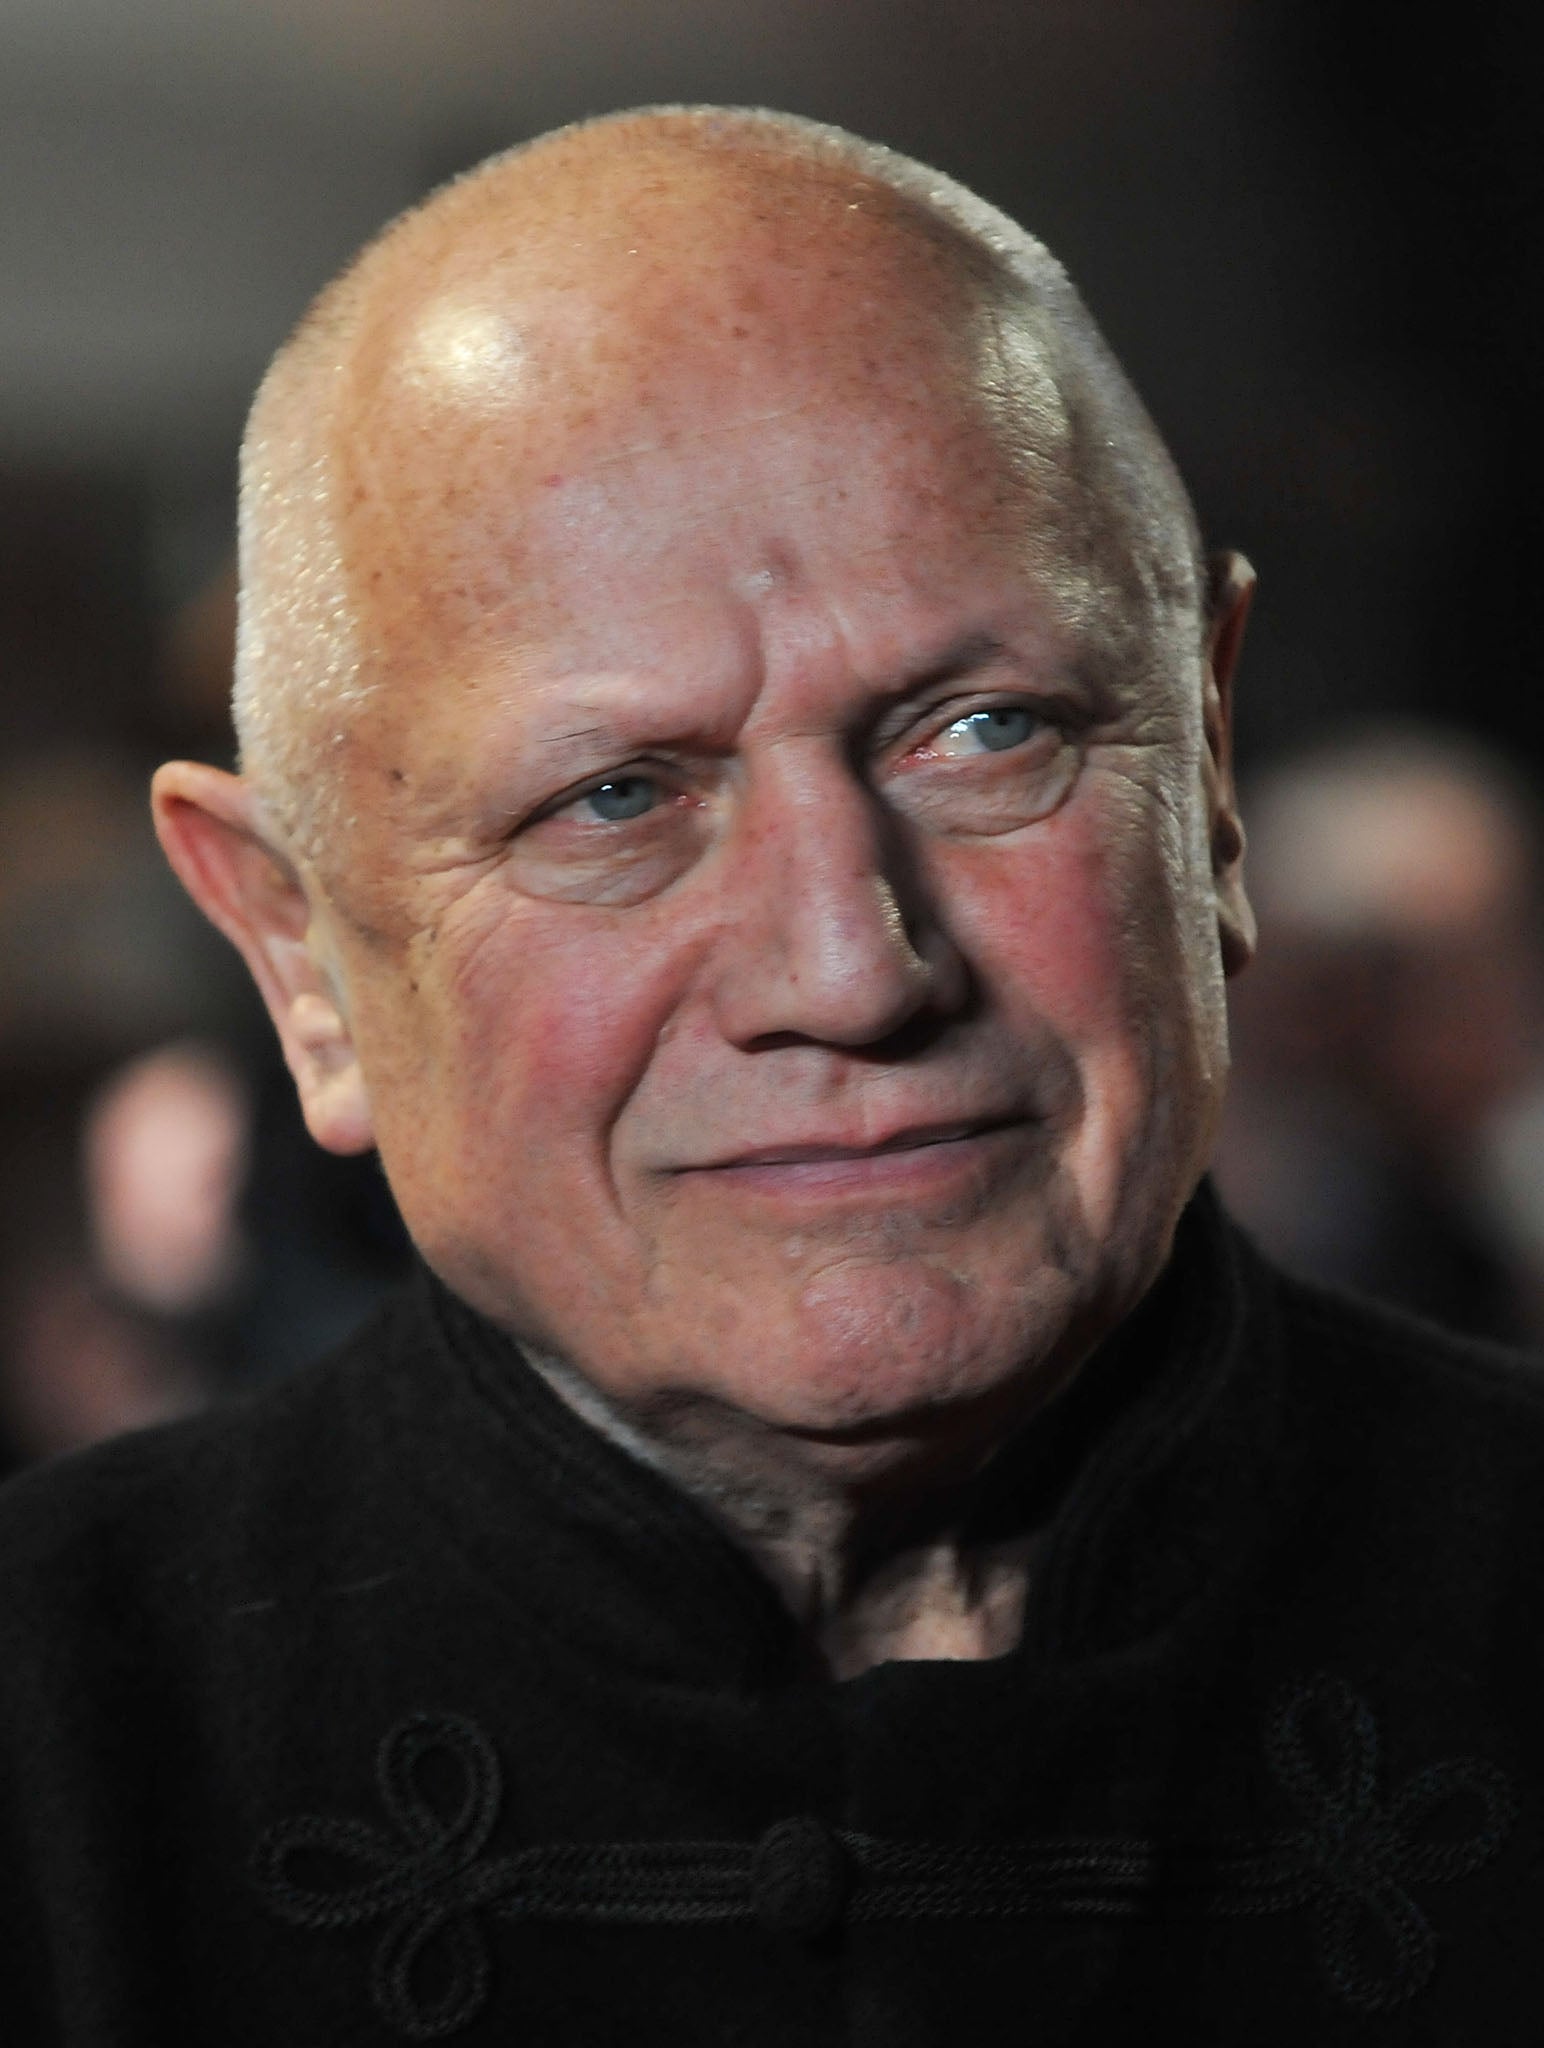 The actor Steven Berkoff was found guilty of driving without due care and attention after knocking a woman down on New Year's Eve